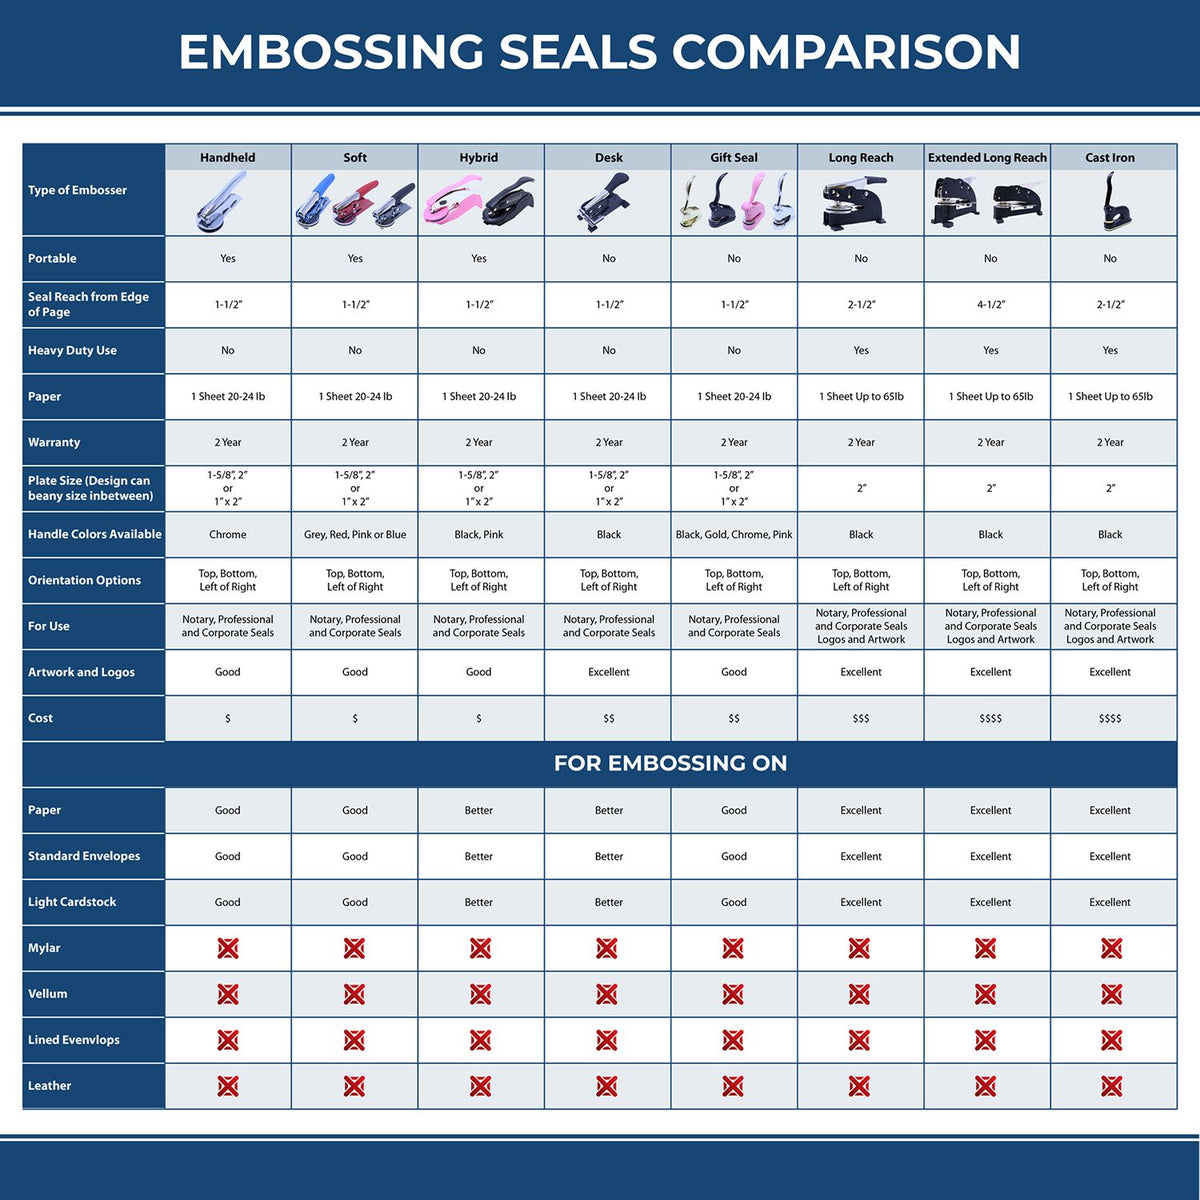 A comparison chart for the different types of mount models available for the Hybrid Arizona Geologist Seal